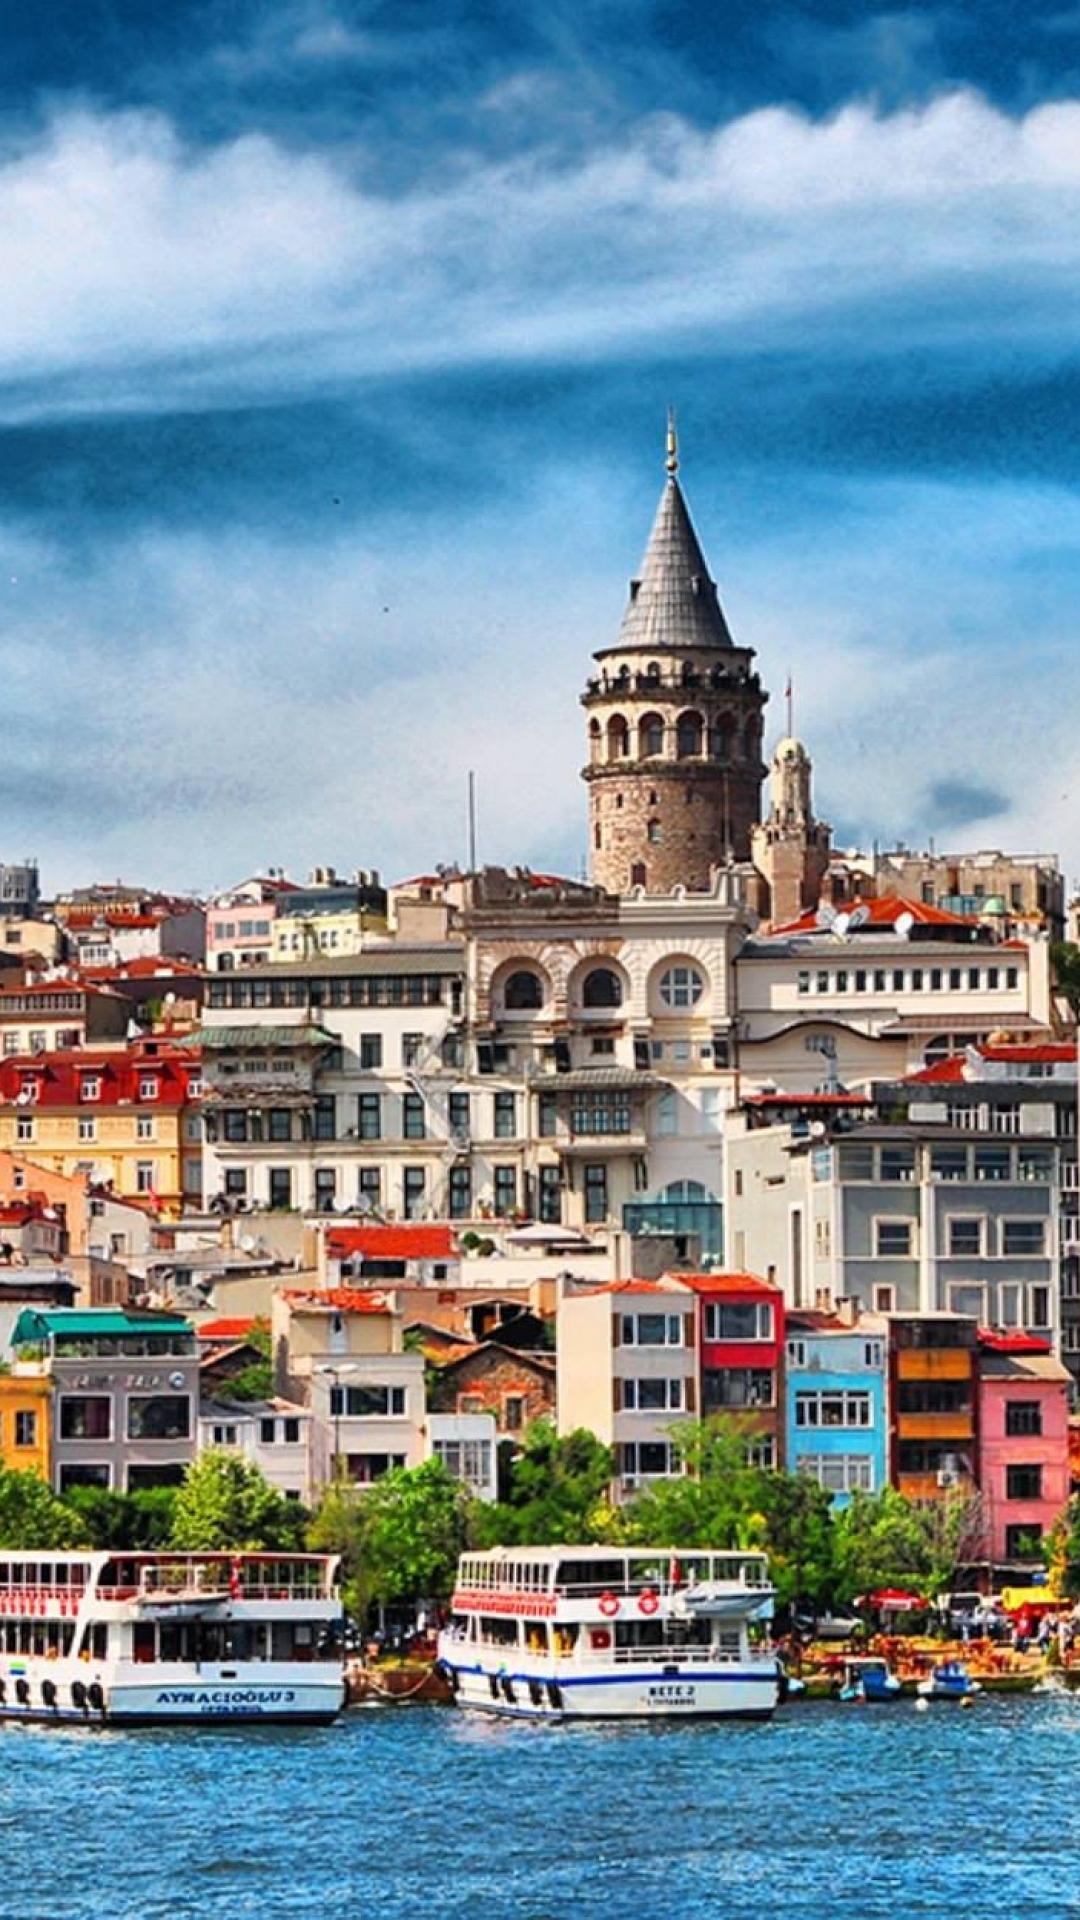 Istanbul Background. Istanbul Wallpaper, Istanbul Turkey Wallpaper and Istanbul Tulips Wallpaper